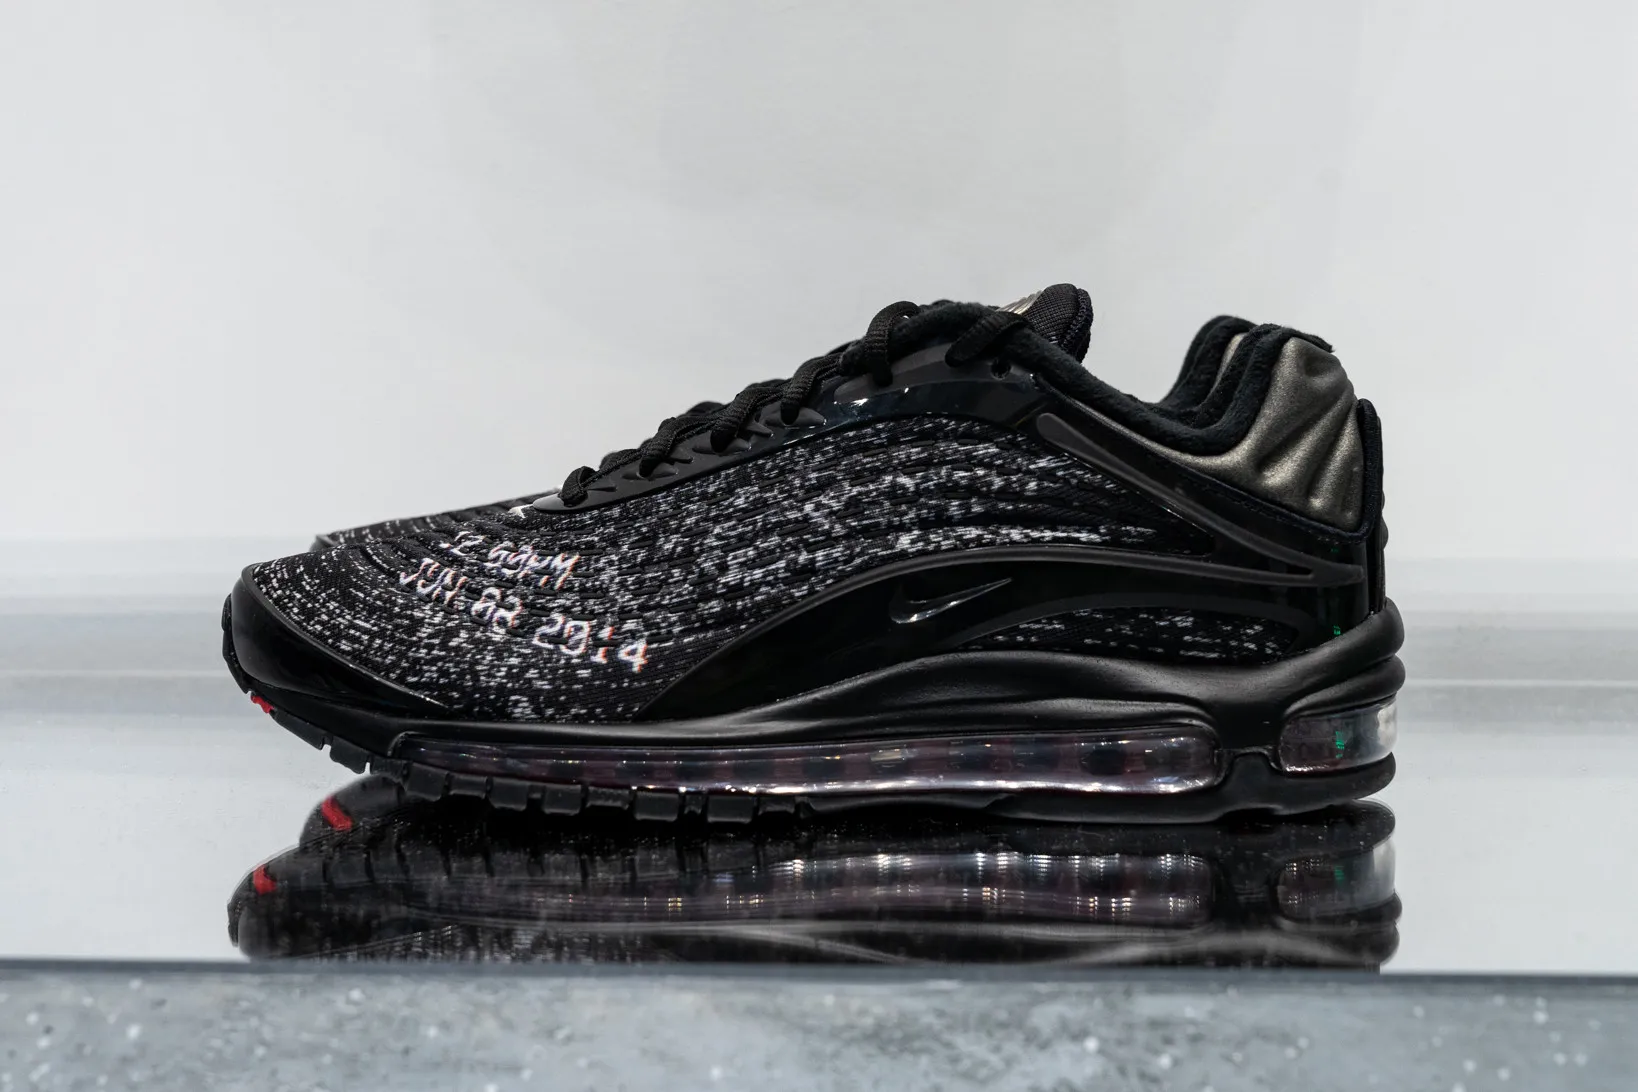 https 2F2Fhypebeastcom2Fimage2F20182F082Fskepta nike air max deluxe closer collab look 1